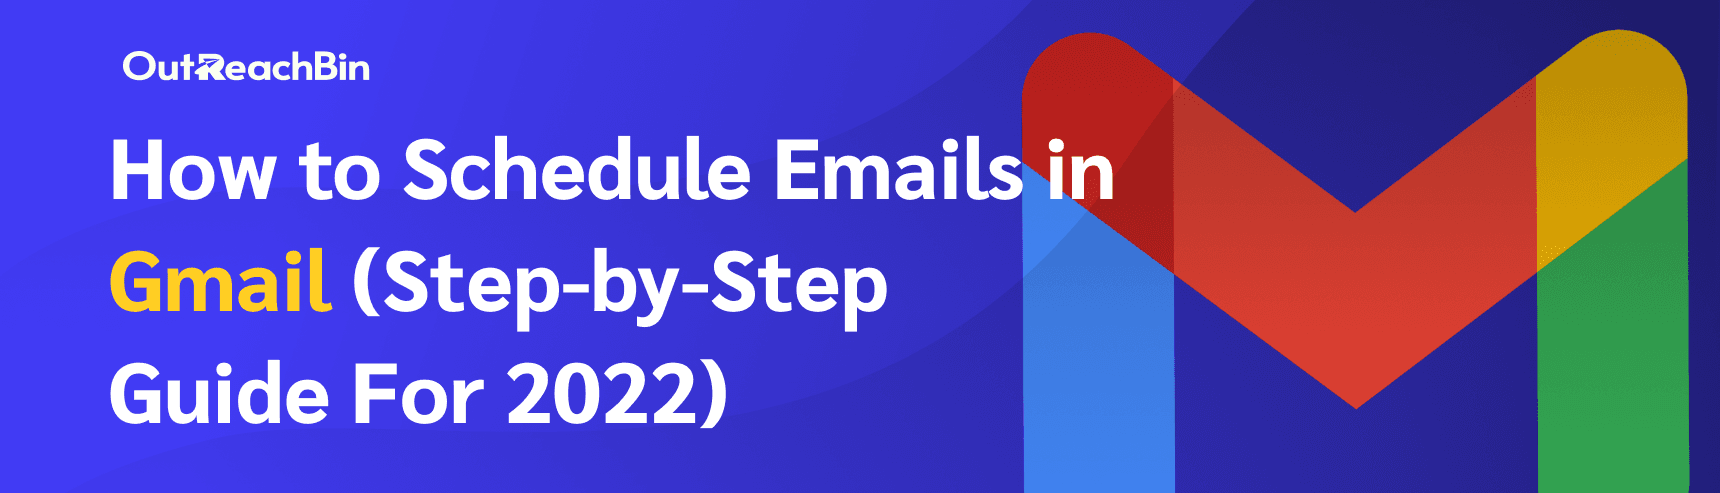 How to Schedule Emails in Gmail (Step-by-Step Guide For 2022) cover